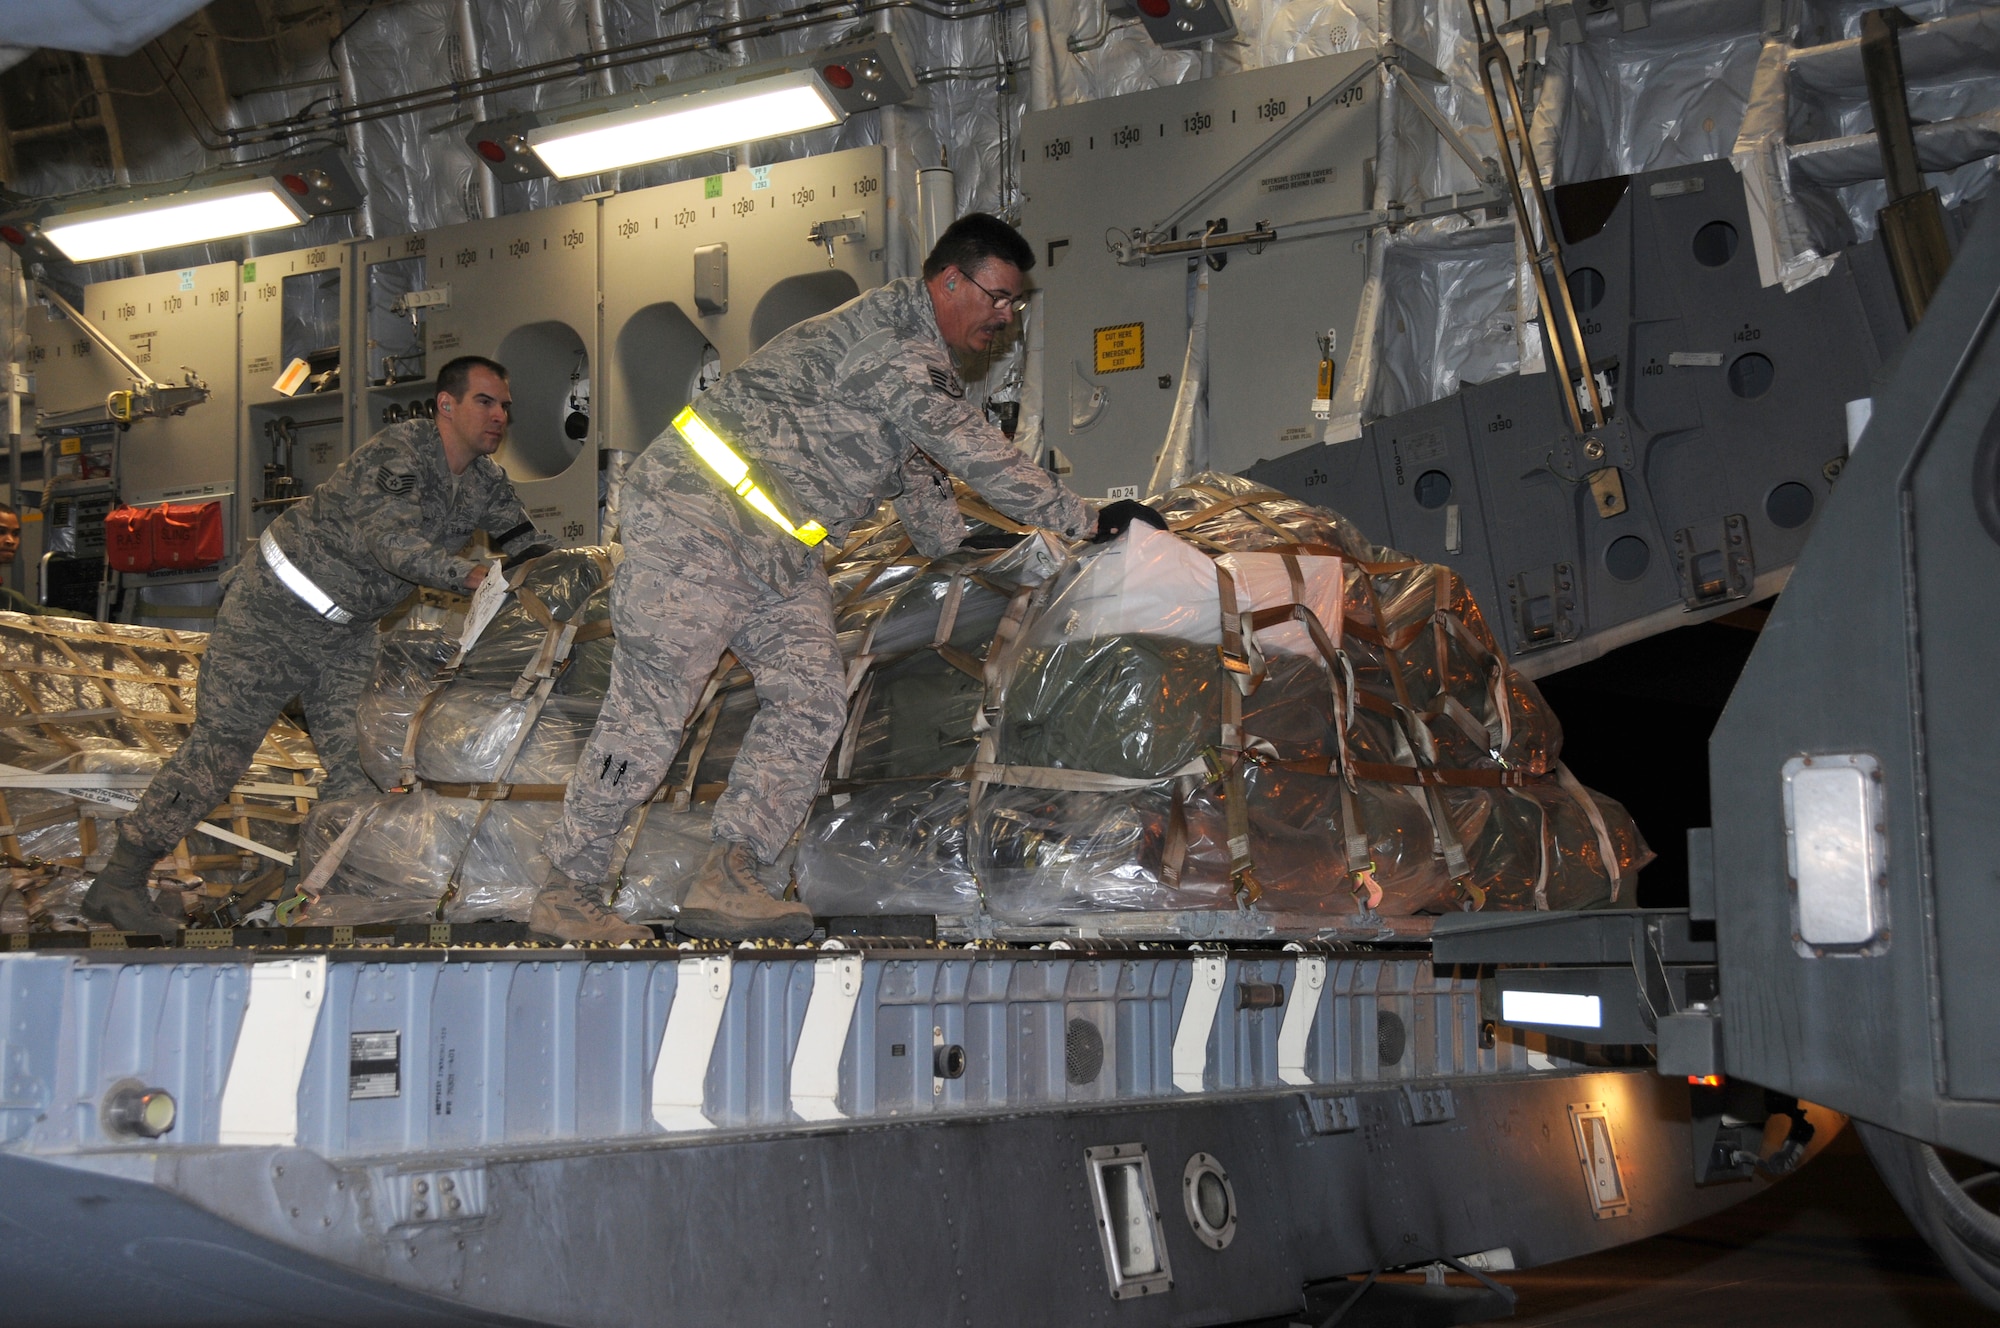 Tech. Sgt. Zack Davenport and Staff Sgt. Bret Earls, 161 Air Refueling Wing Aerial Port, unload a pallet off a C-17 Globemaster III in support of Vigilant Guard, Nov. 2, 2011 in Phoenix. Vigilant Guard is an exercise involving the nation's first responders, whose mission was to respond to a simulated flood and improvised nuclear device detonation during the exercise here, Nov. 2-7, 2011.Members from the 161 ARW, along with National Guard units from California, Colorado, and Arizona, along with local, state and federal emergency responders participated in the exercise. (U.S. Air Force photo/Master Sergeant Kelly M. Deitloff)

